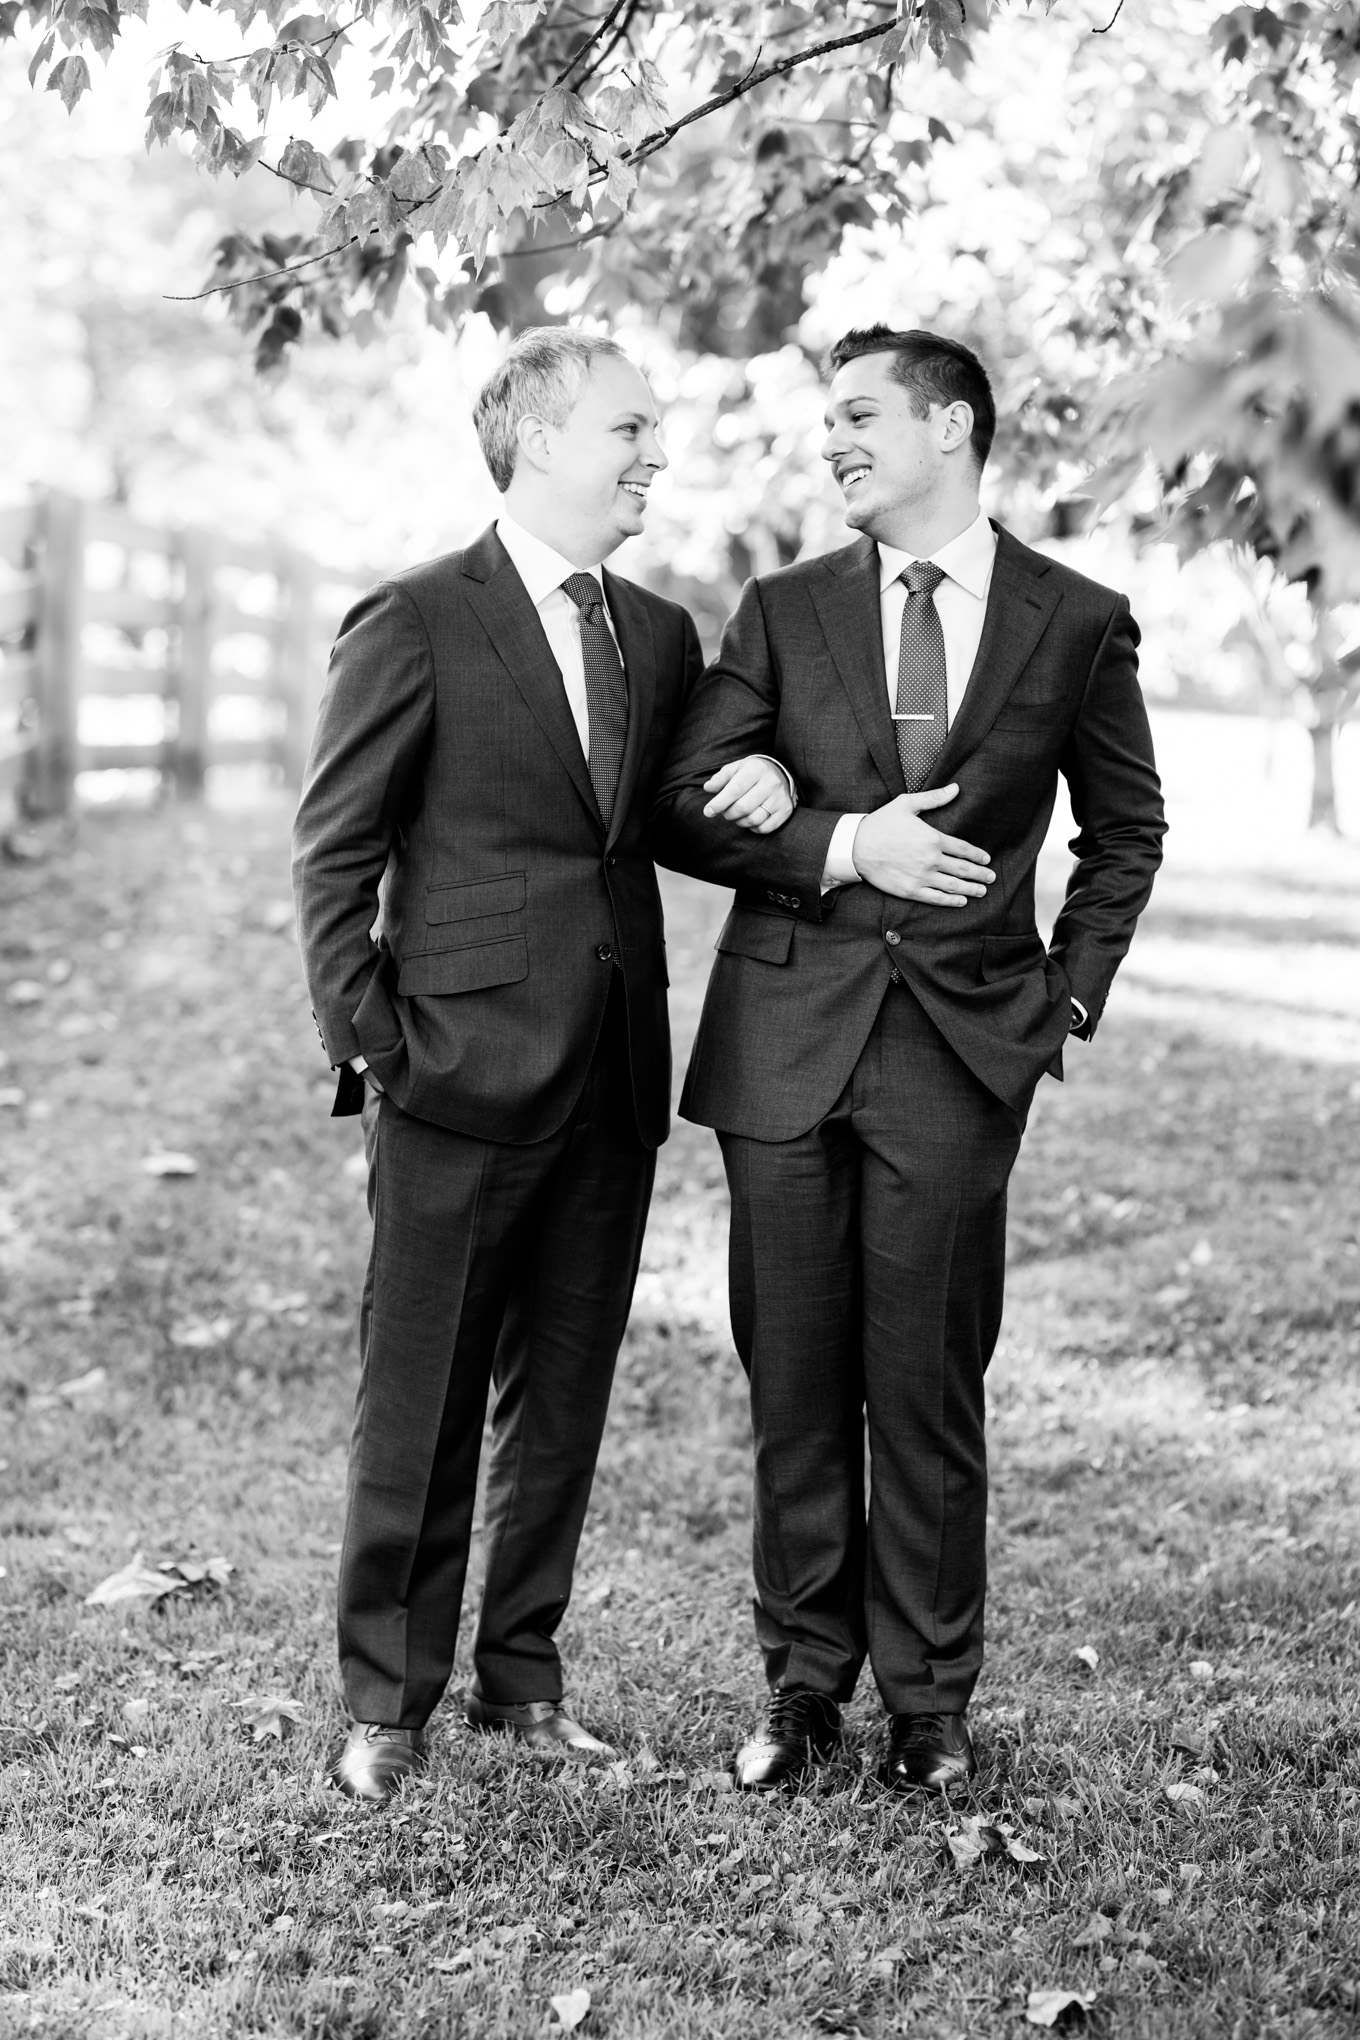 Washington, D.C. courthouse wedding, Washington, D.C. Wedding, fall wedding, autumn wedding, D.C., same sex wedding, courthouse wedding,magic hour portraits, two grooms, Rosedale Conservancy, black and white photography, black and white wedding photography, black and white portraits, young love